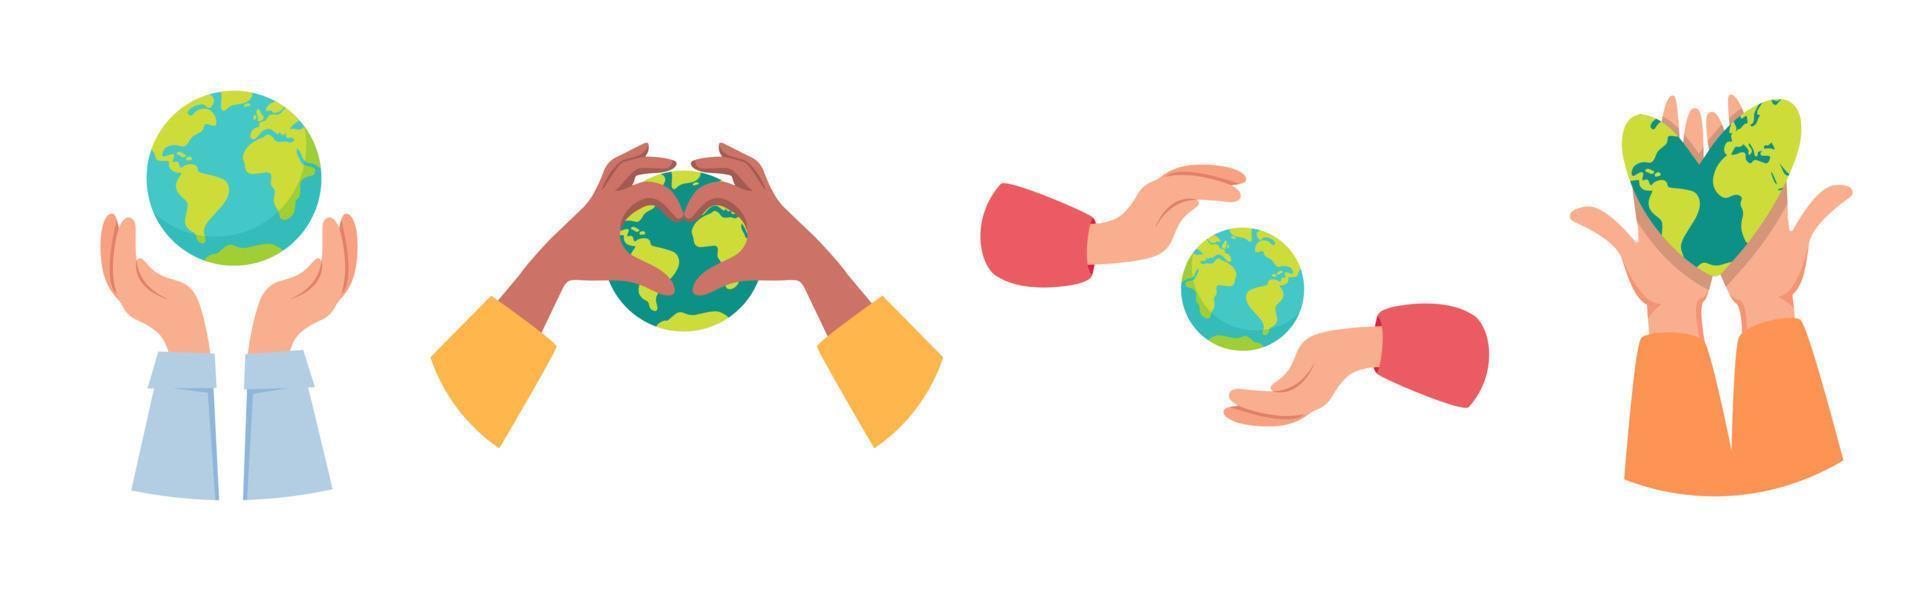 World earth day vector concept. Hands holding and protecting earth. Hands with love or heart gesture. Multi-ethnic hands. Caring for Nature.